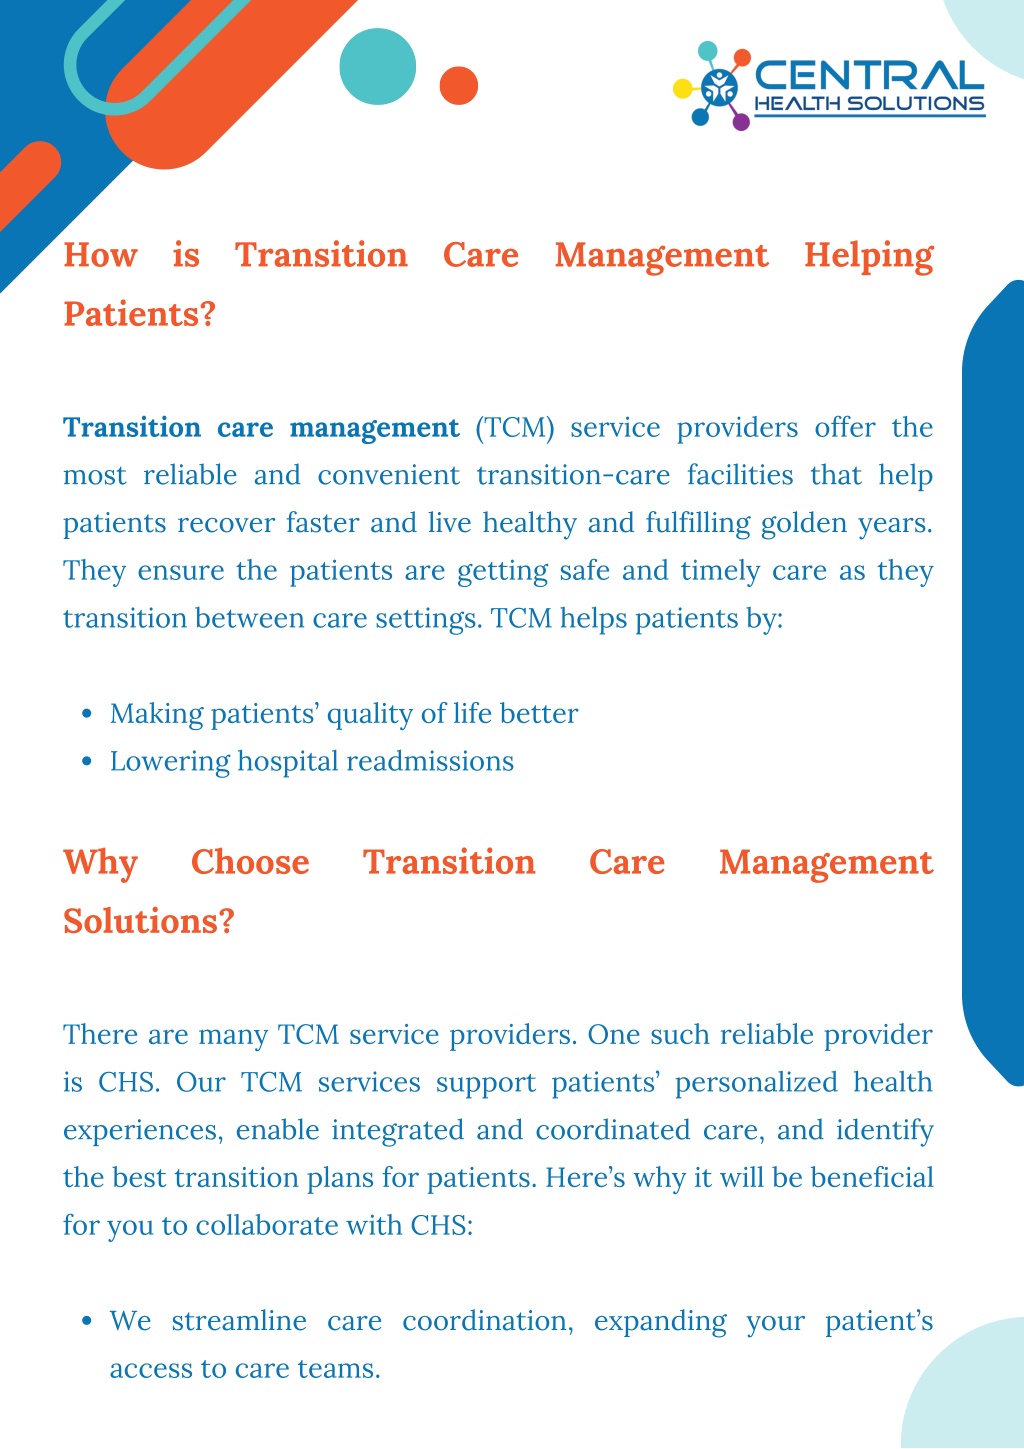 Ppt Transition Care Management Helping Patients Transition To A New Care Setting Powerpoint 7524